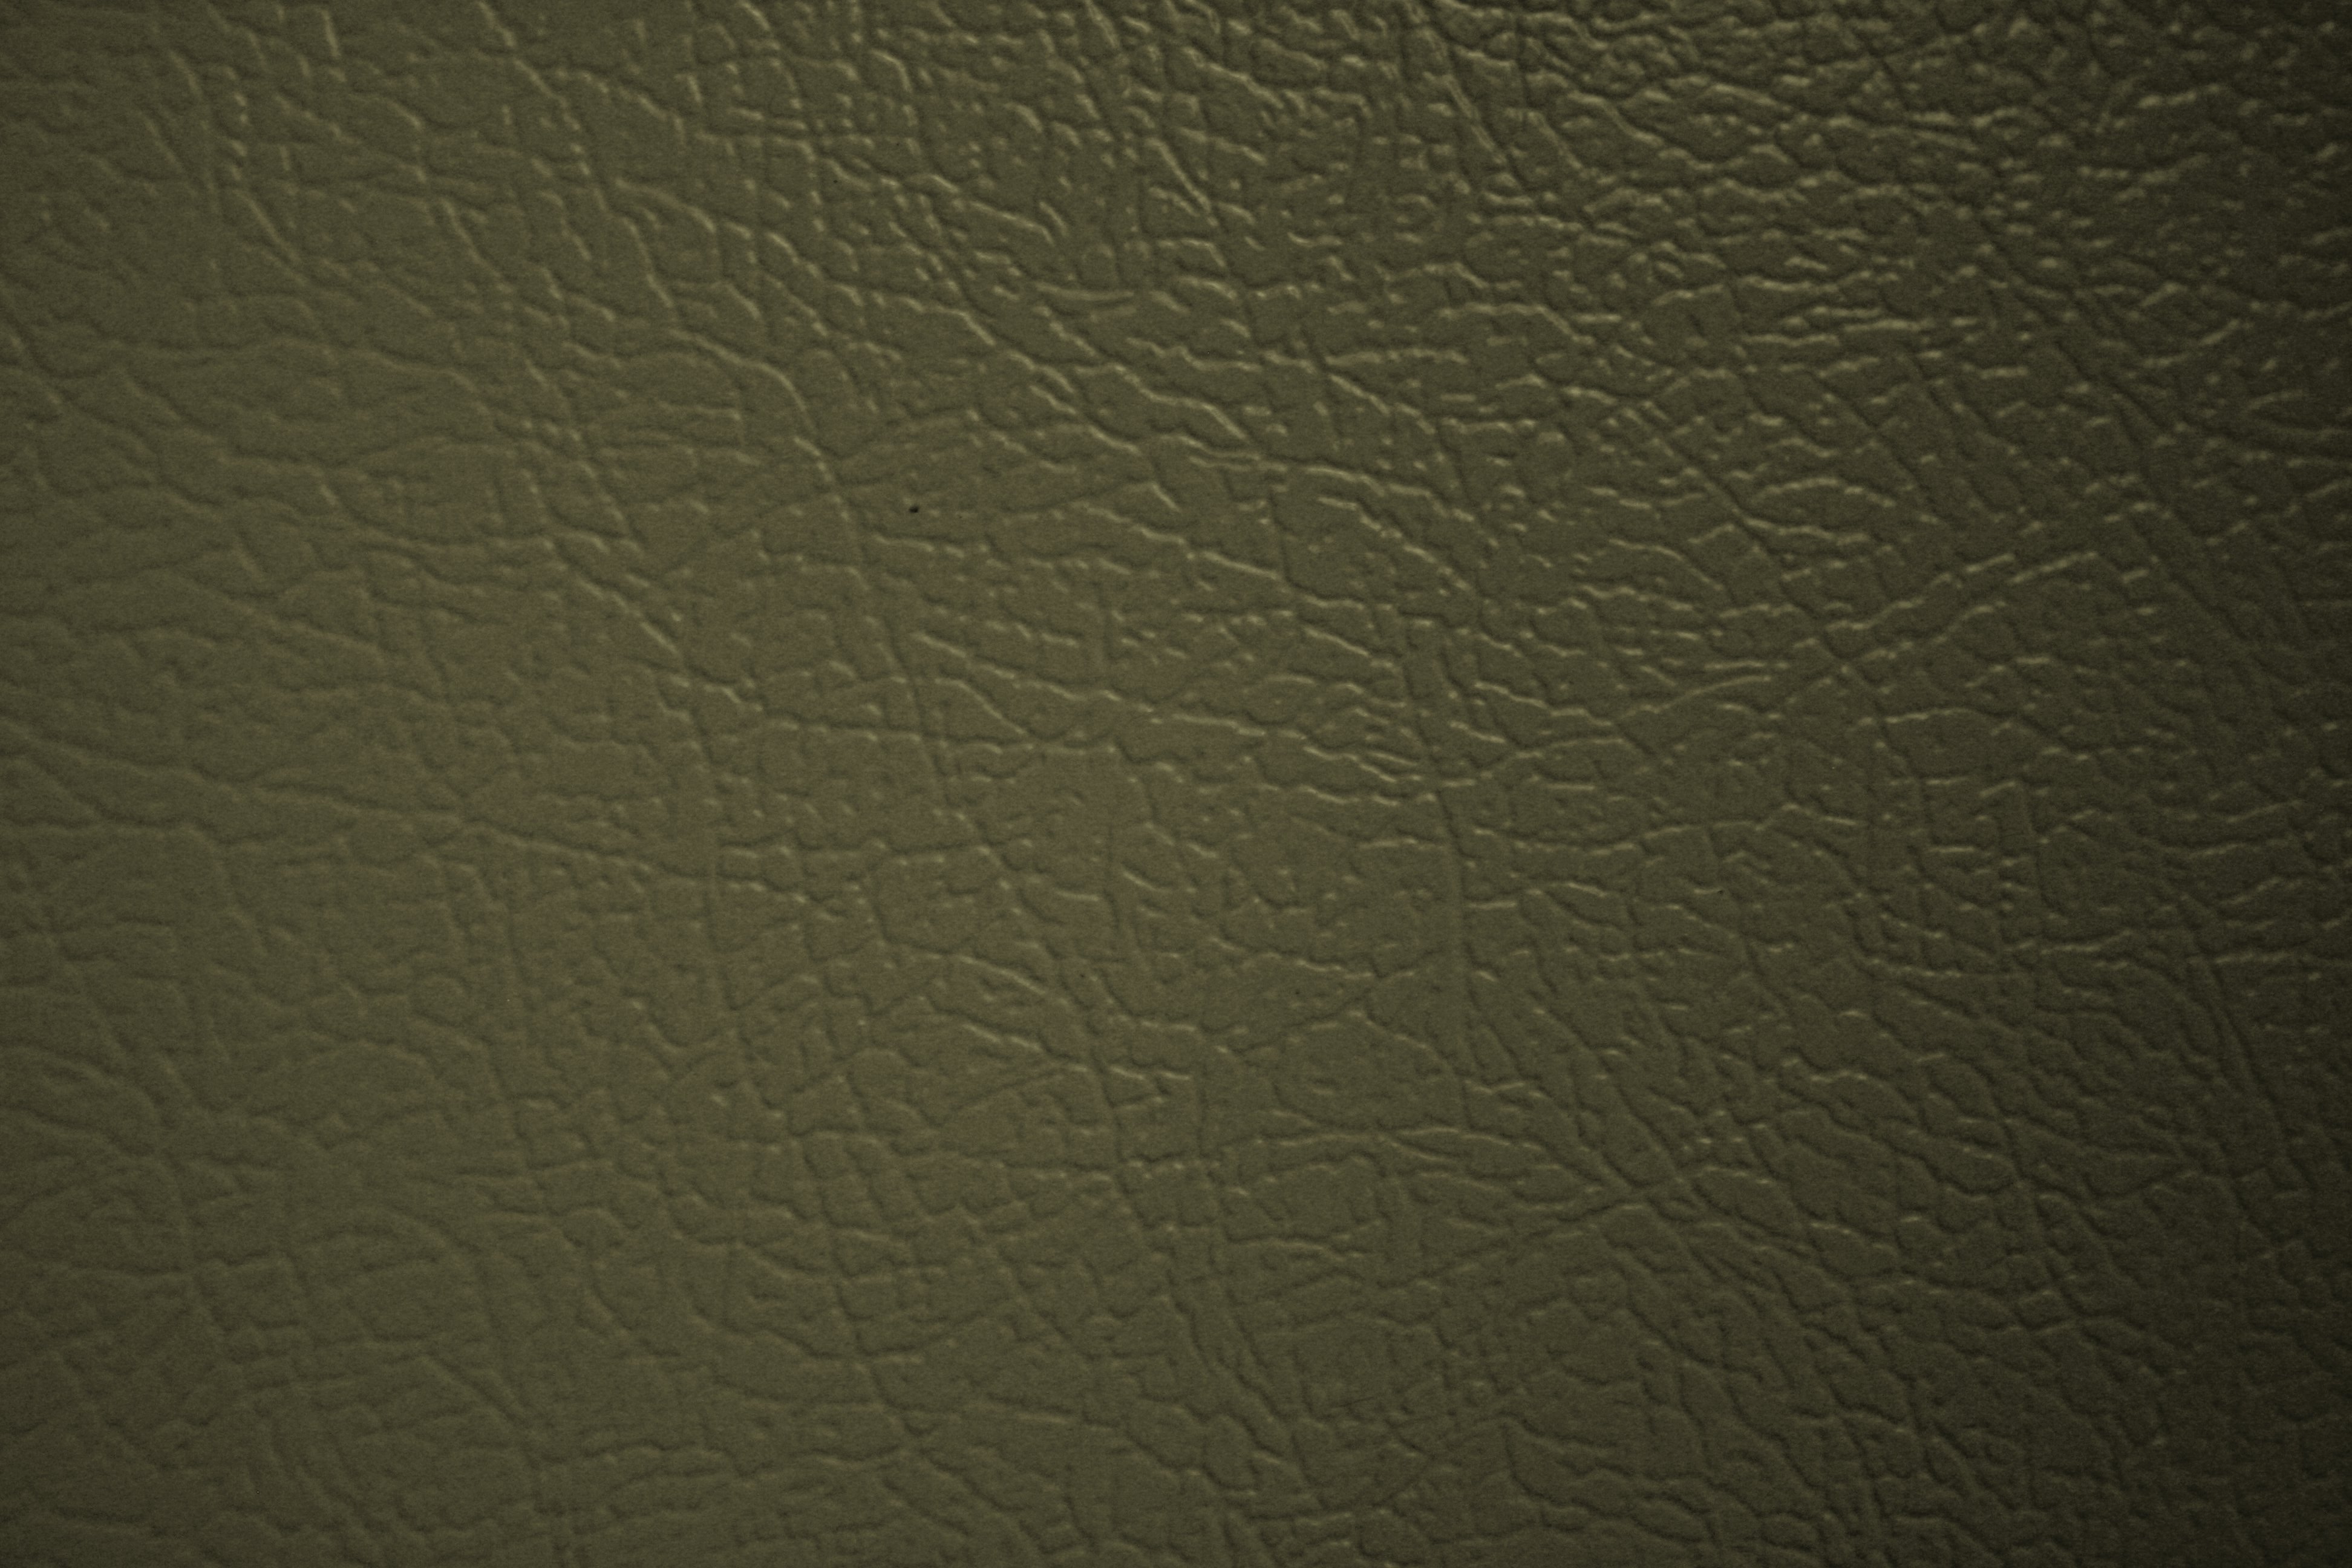 Leather textures high quality free textures, free download — Картинки и ...